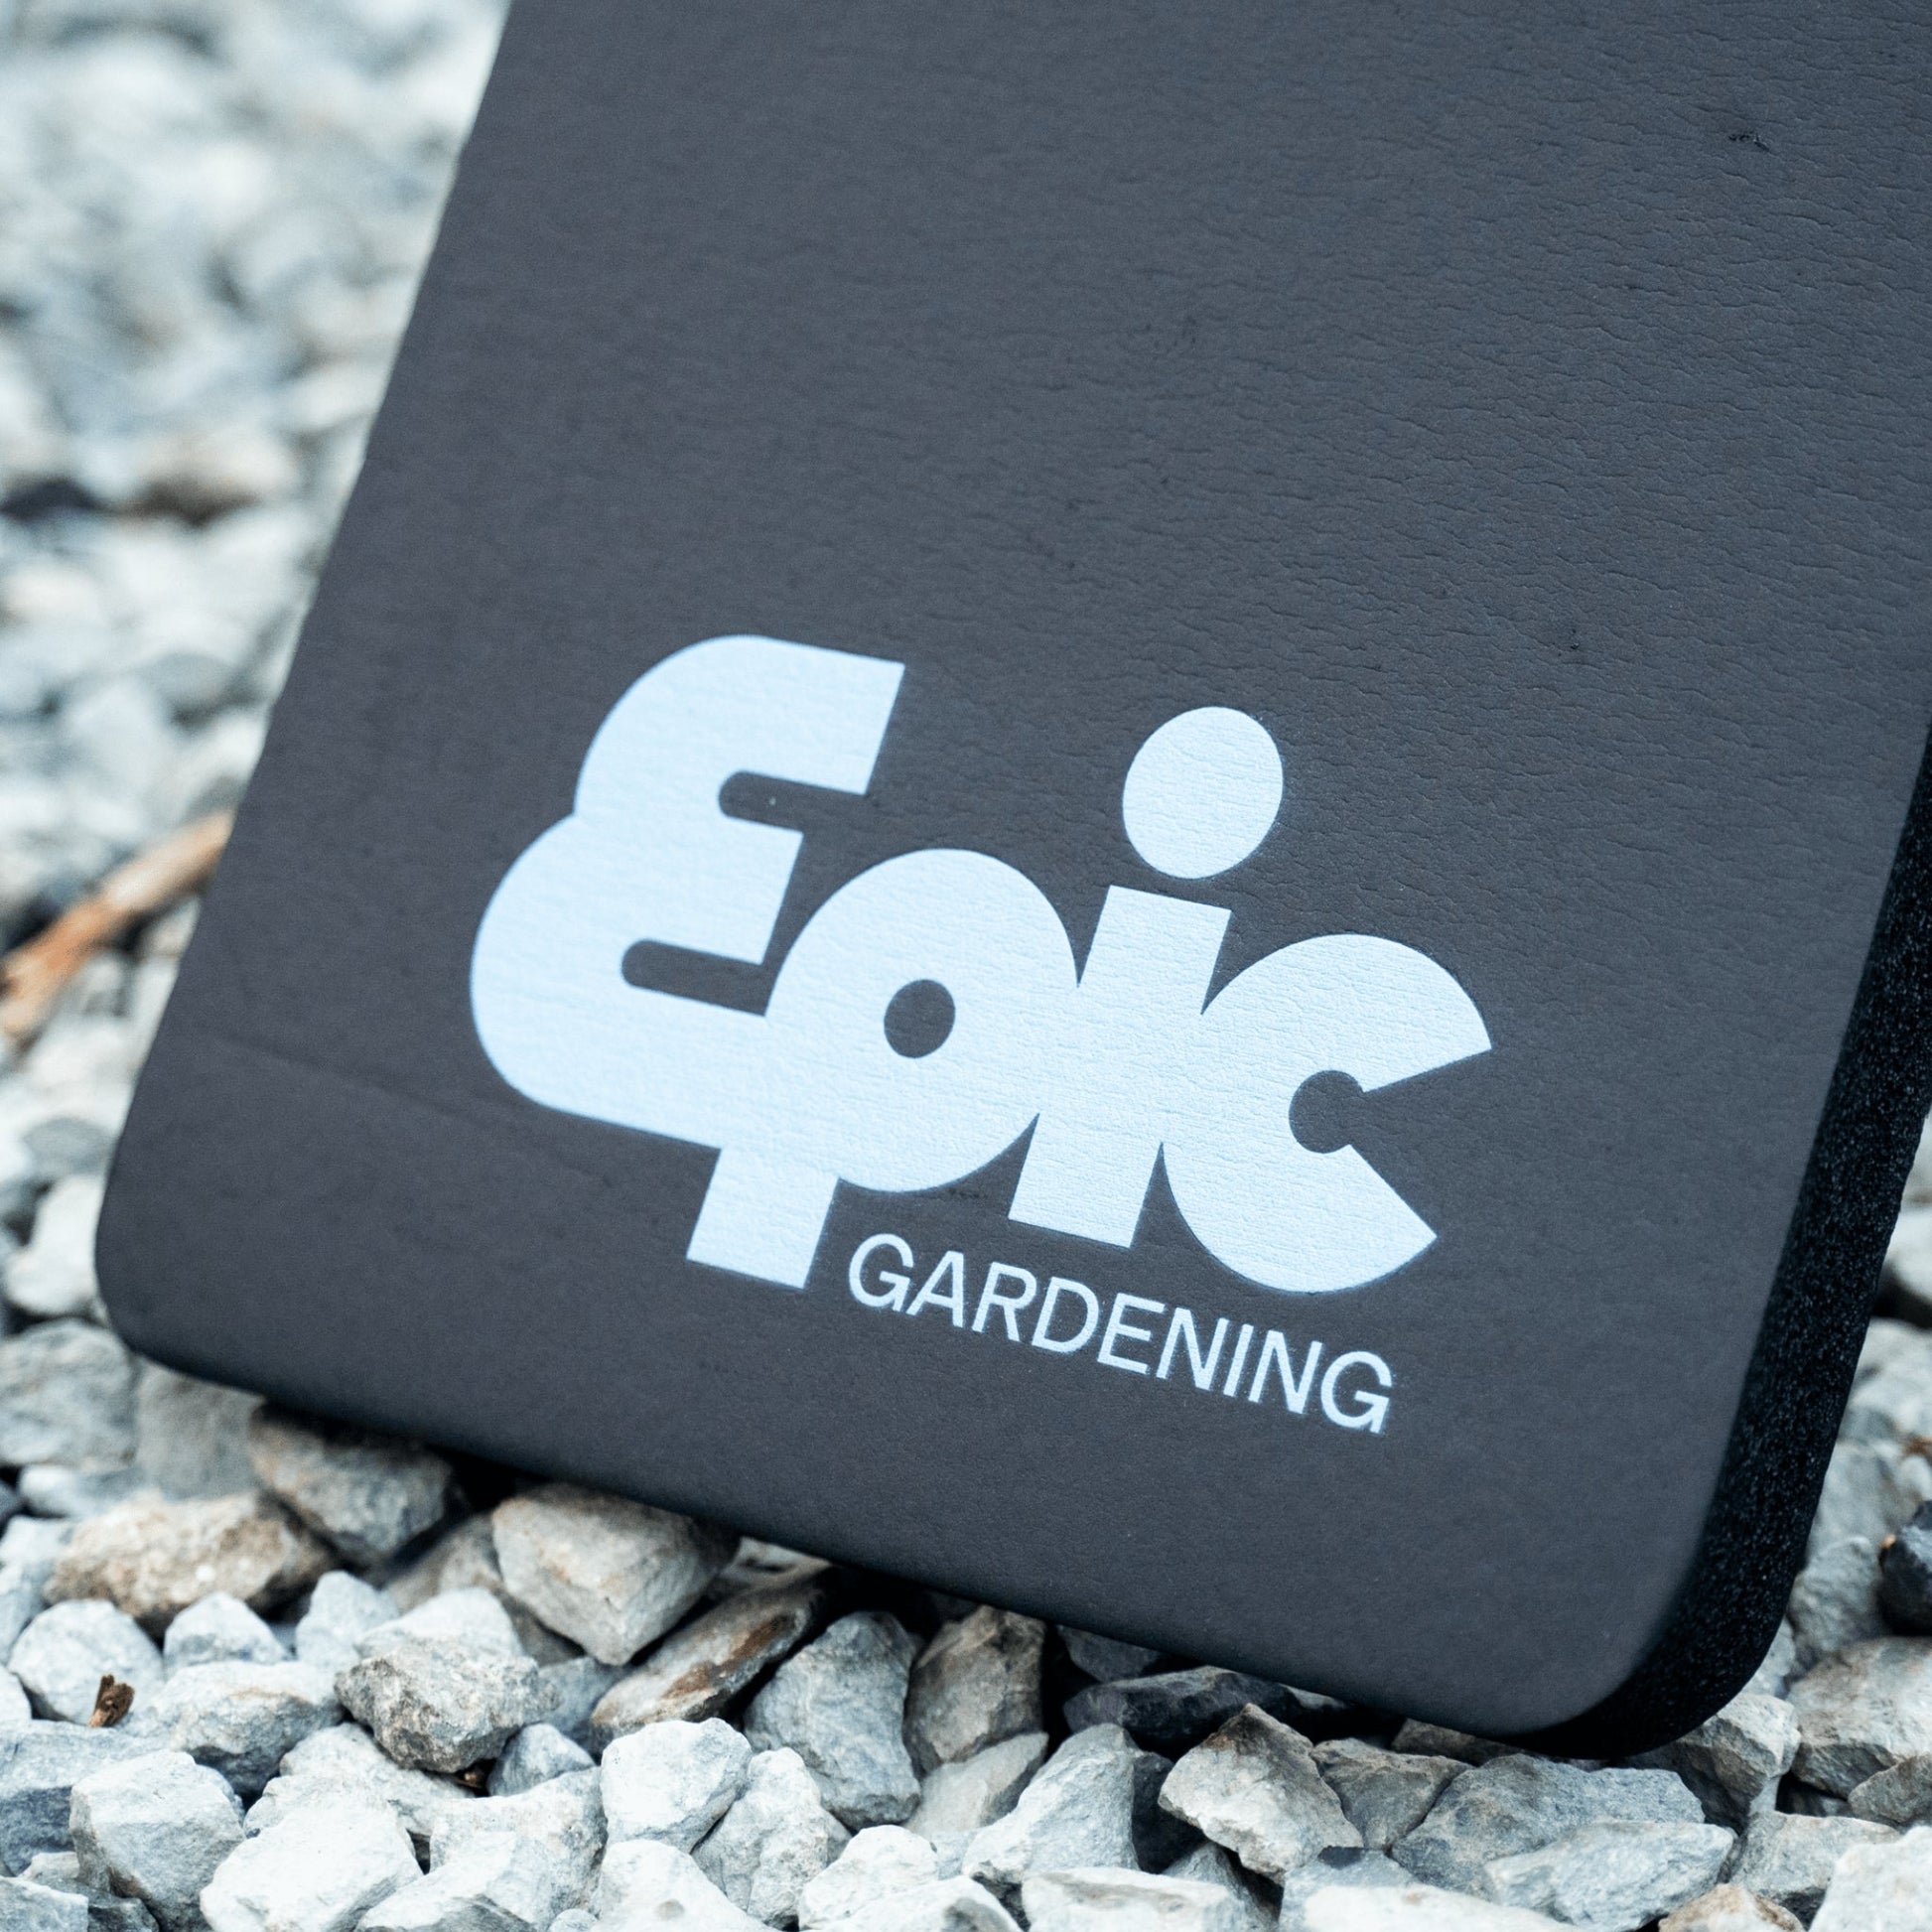 Kneepad for gardening resting on rocks. The pad is black, with Epic Gardening branding written at the bottom.